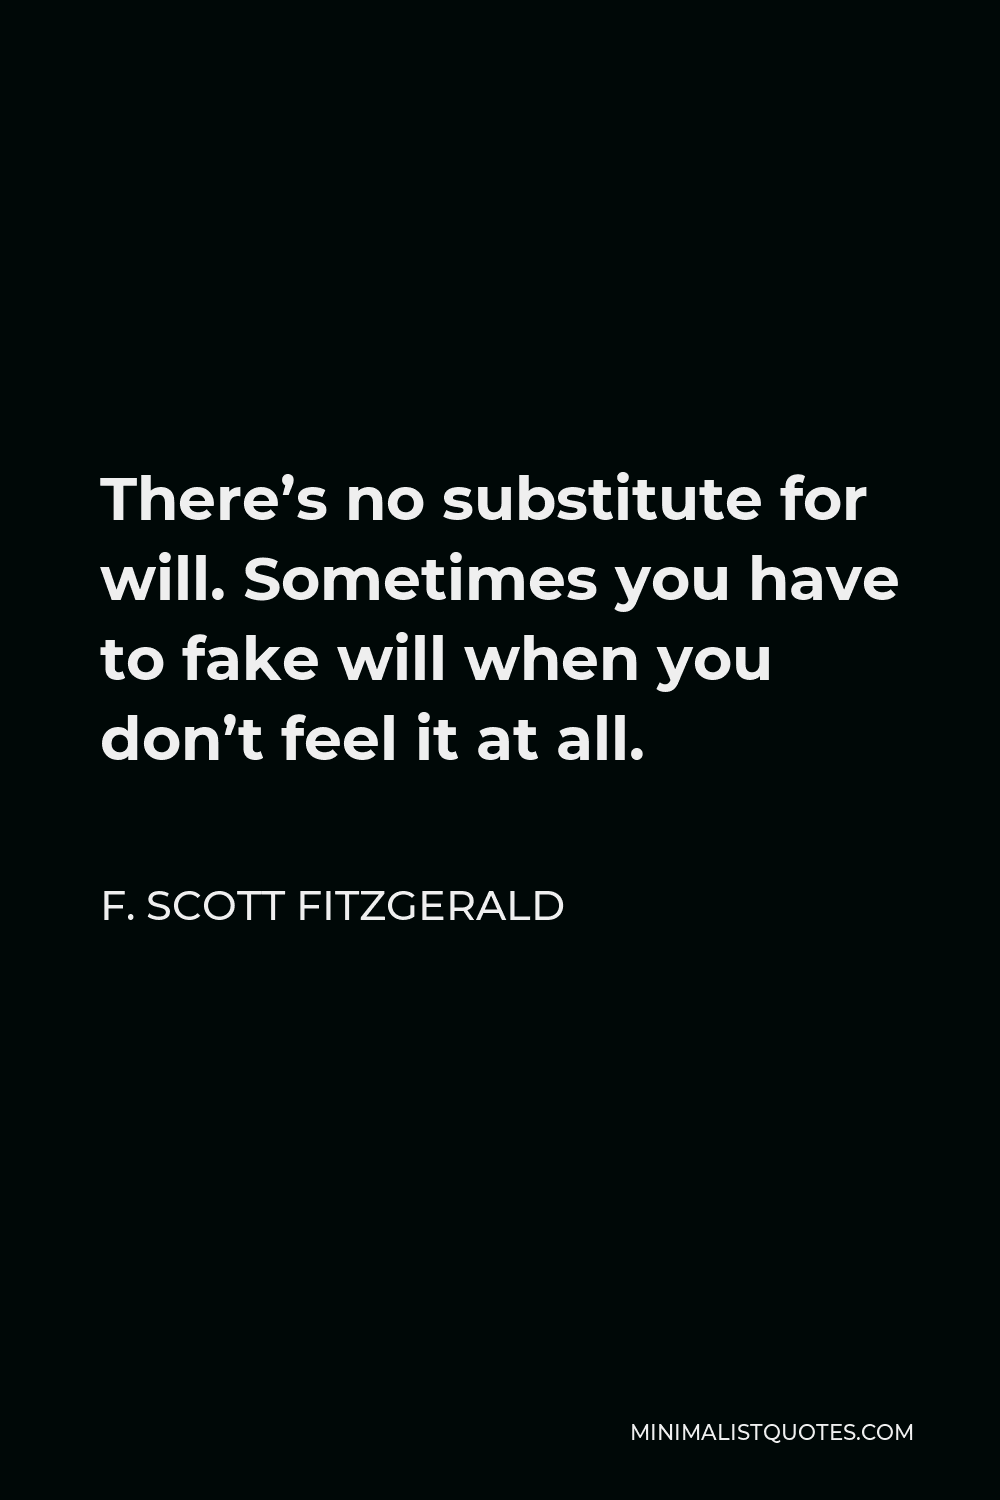 F. Scott Fitzgerald Quote - There’s no substitute for will. Sometimes you have to fake will when you don’t feel it at all.